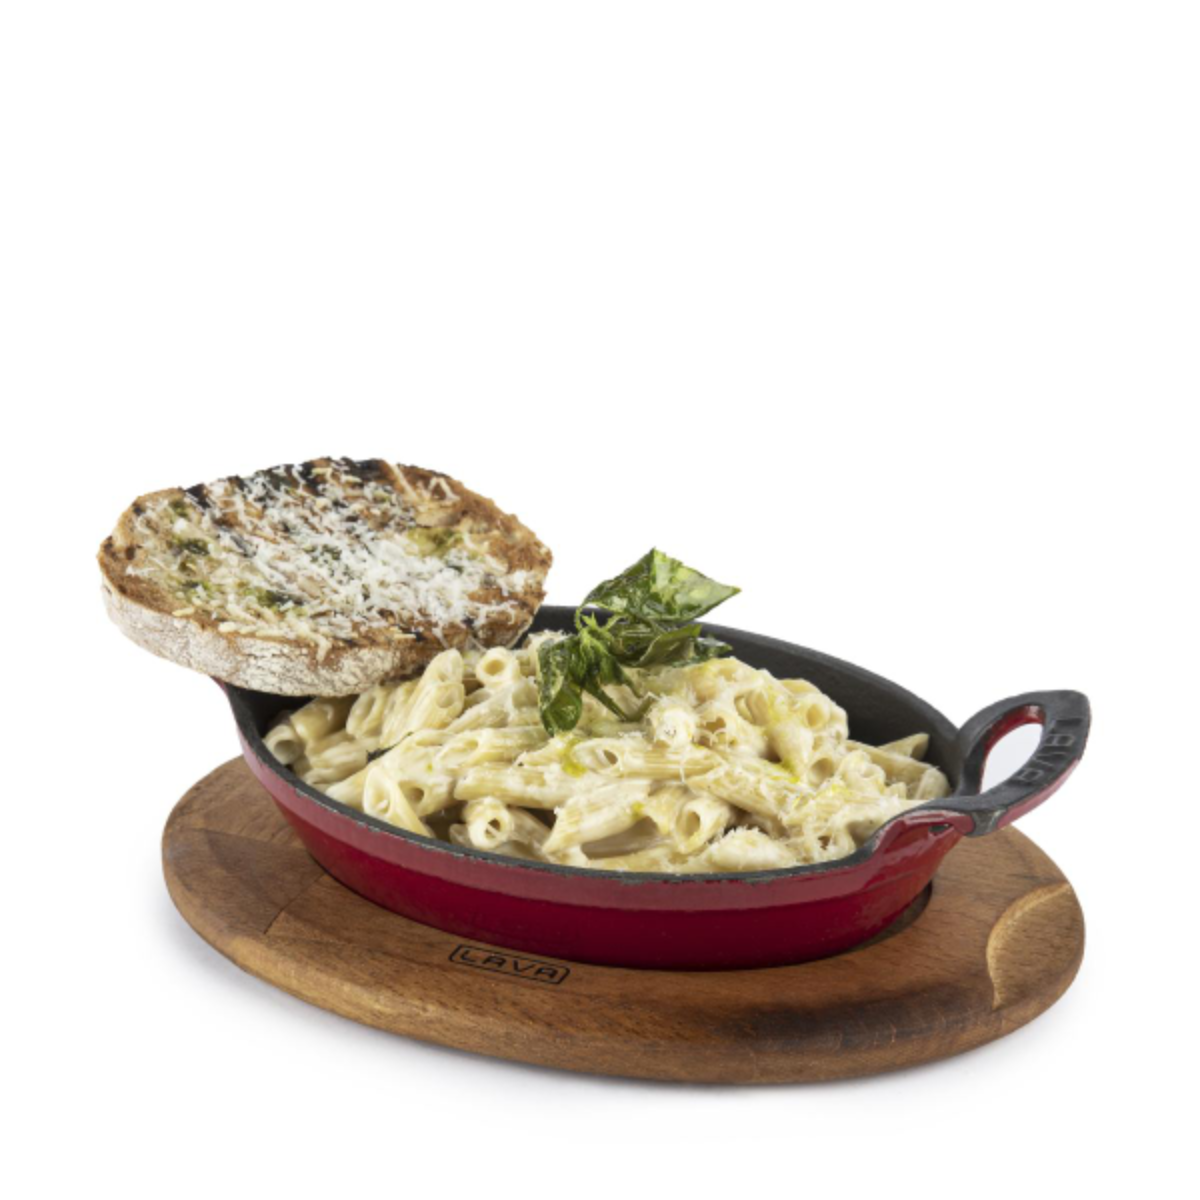 Pesto four cheese hover image